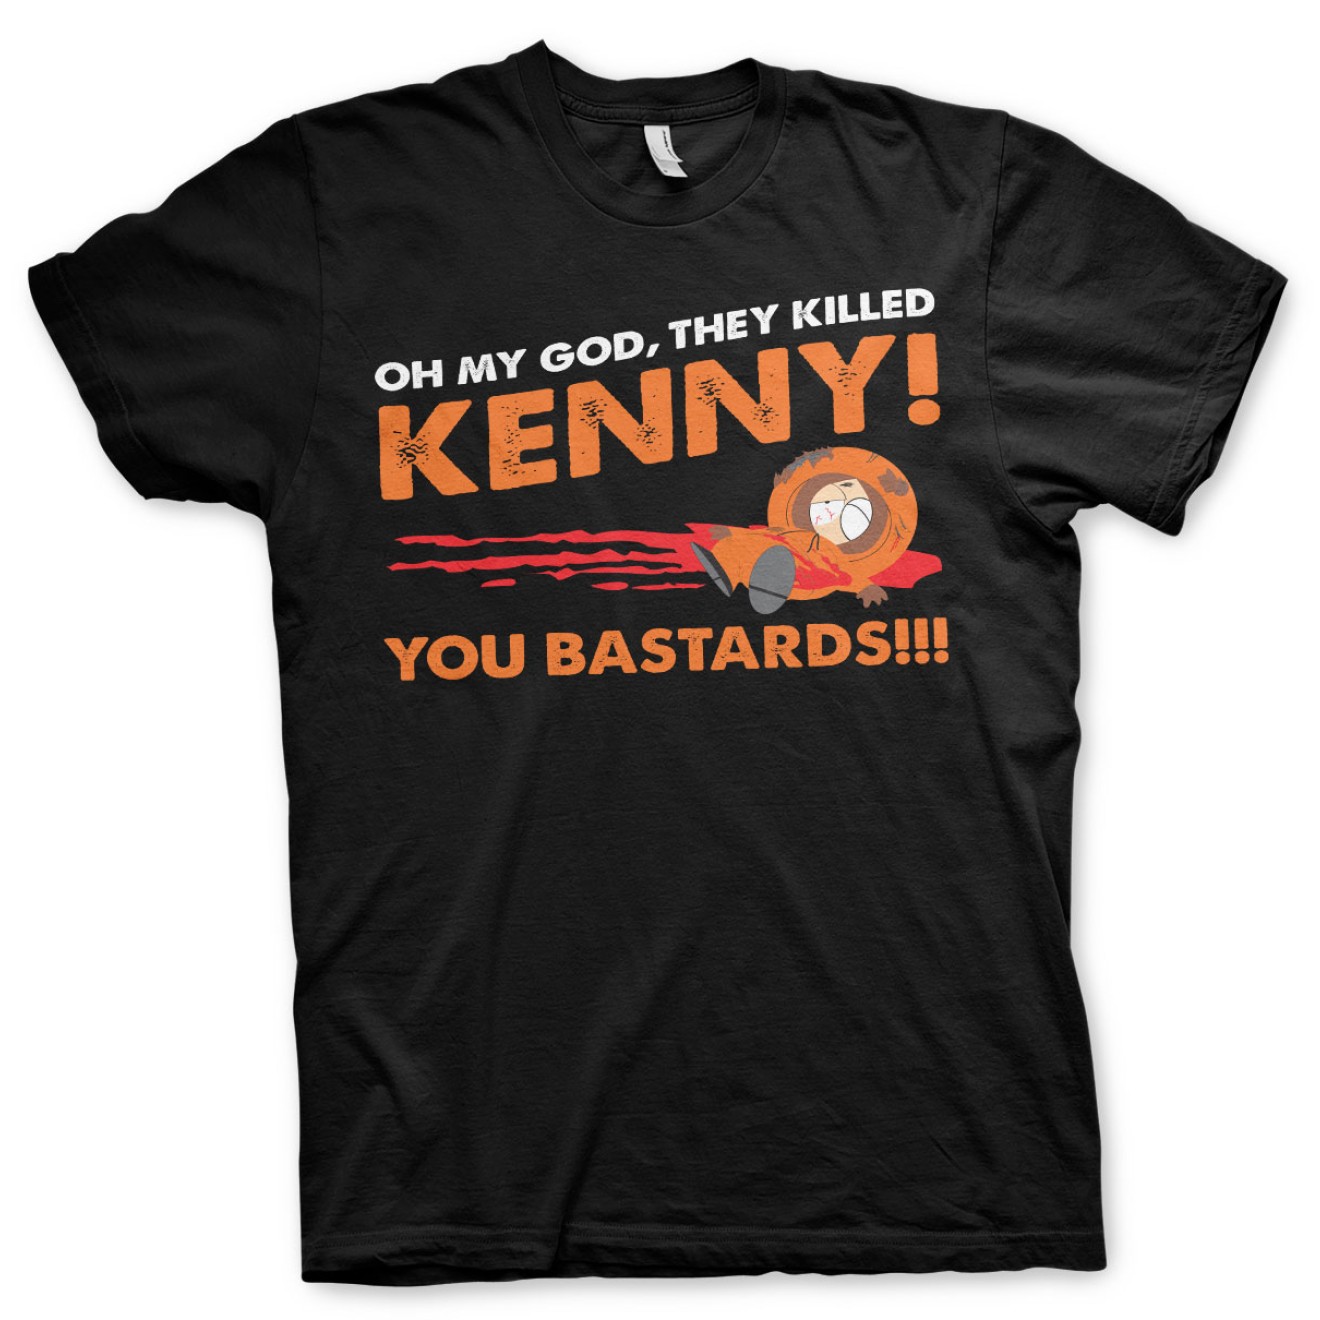 South Park - They Killed Kenny T-Shirt